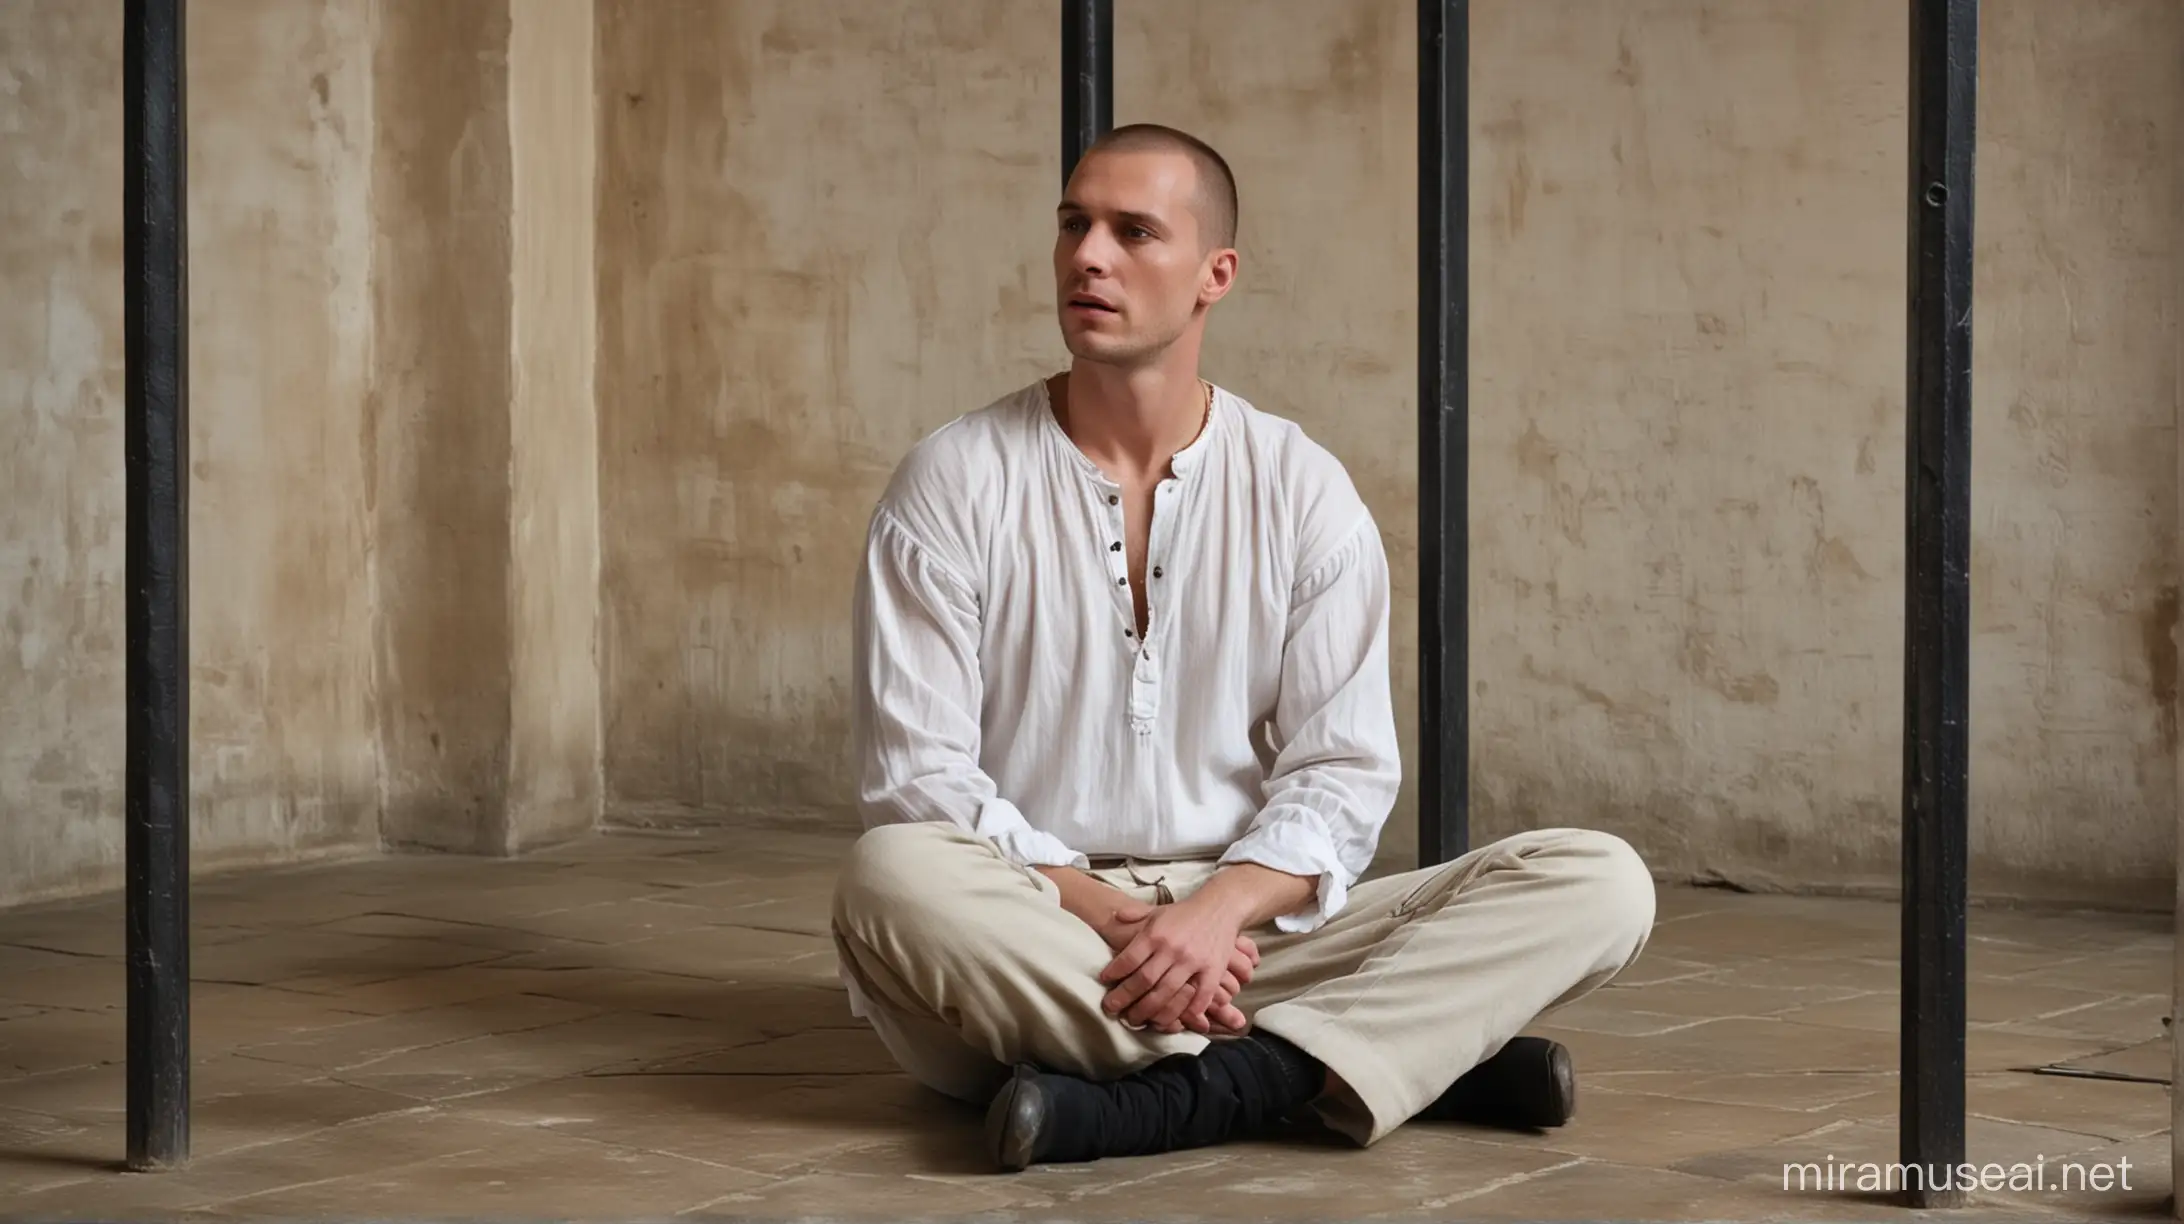 There is a man in an empty jail in tudor times. The man is seated on the floor. He is wearing a simple white blouse. He has shaved hair.  He has a relaxed and tranquil expression on his face. We can see his face and he is facing straight. 